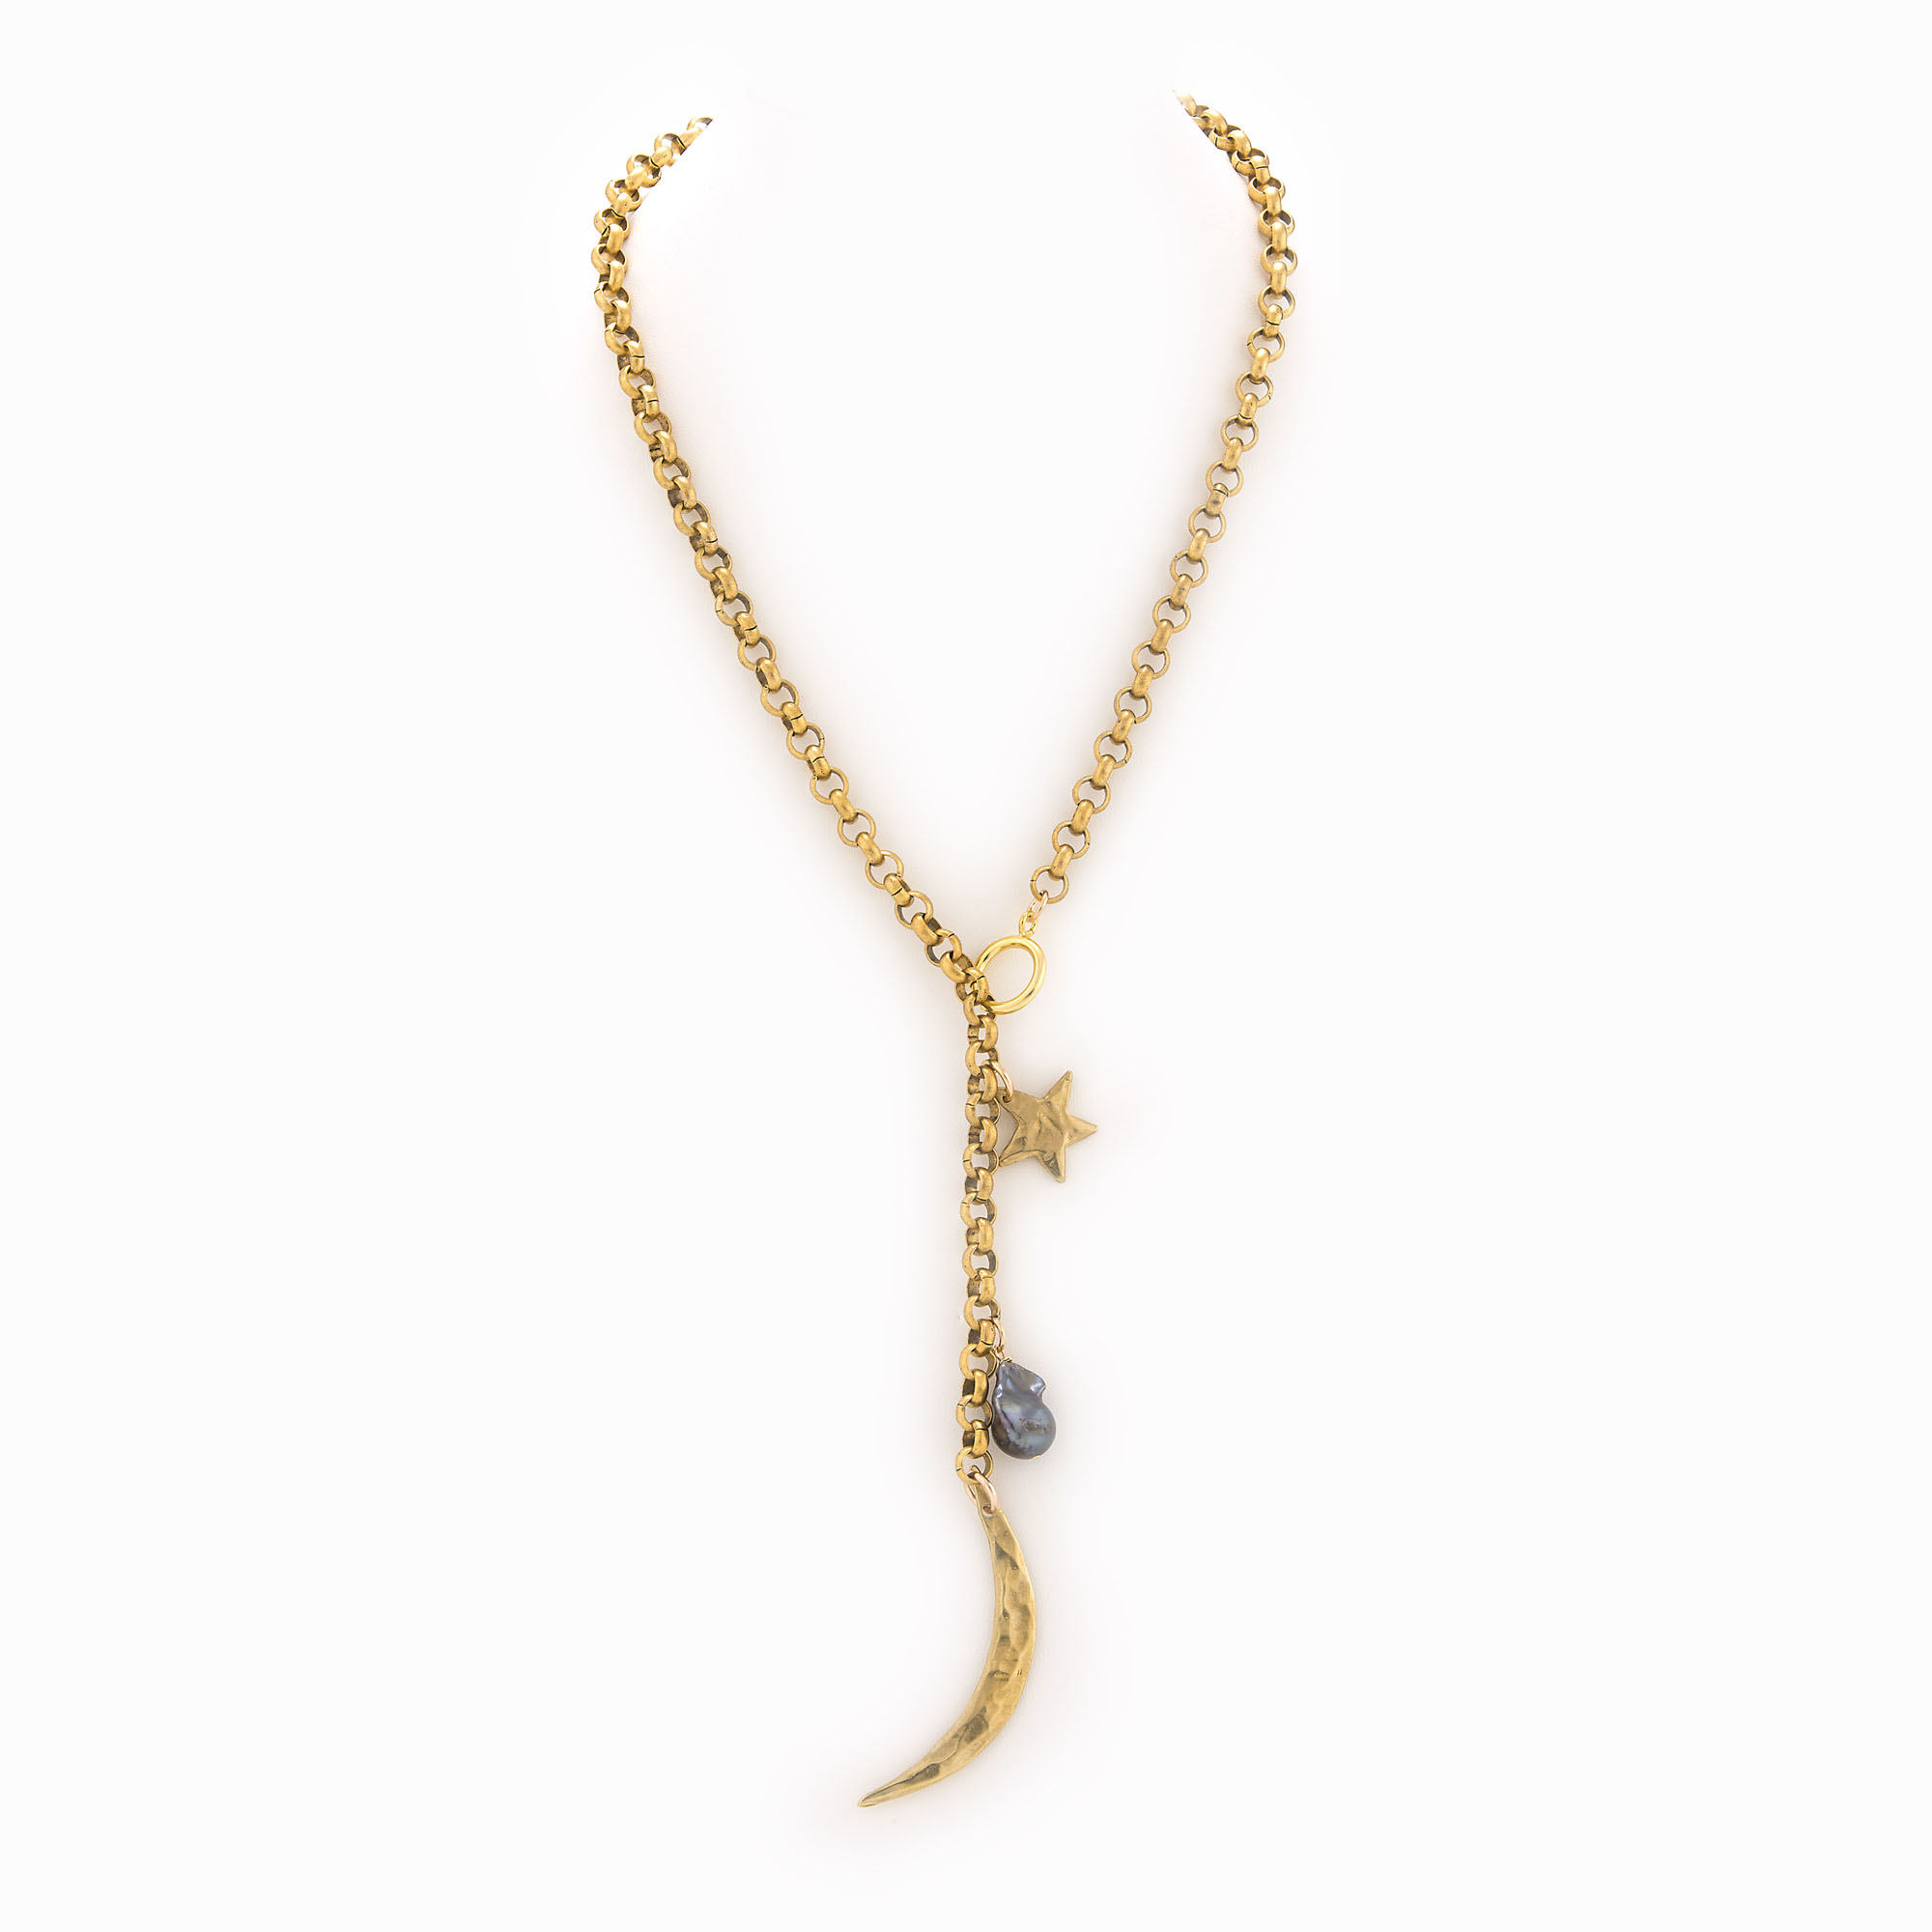 Featured image for “Reva Brass Necklace”